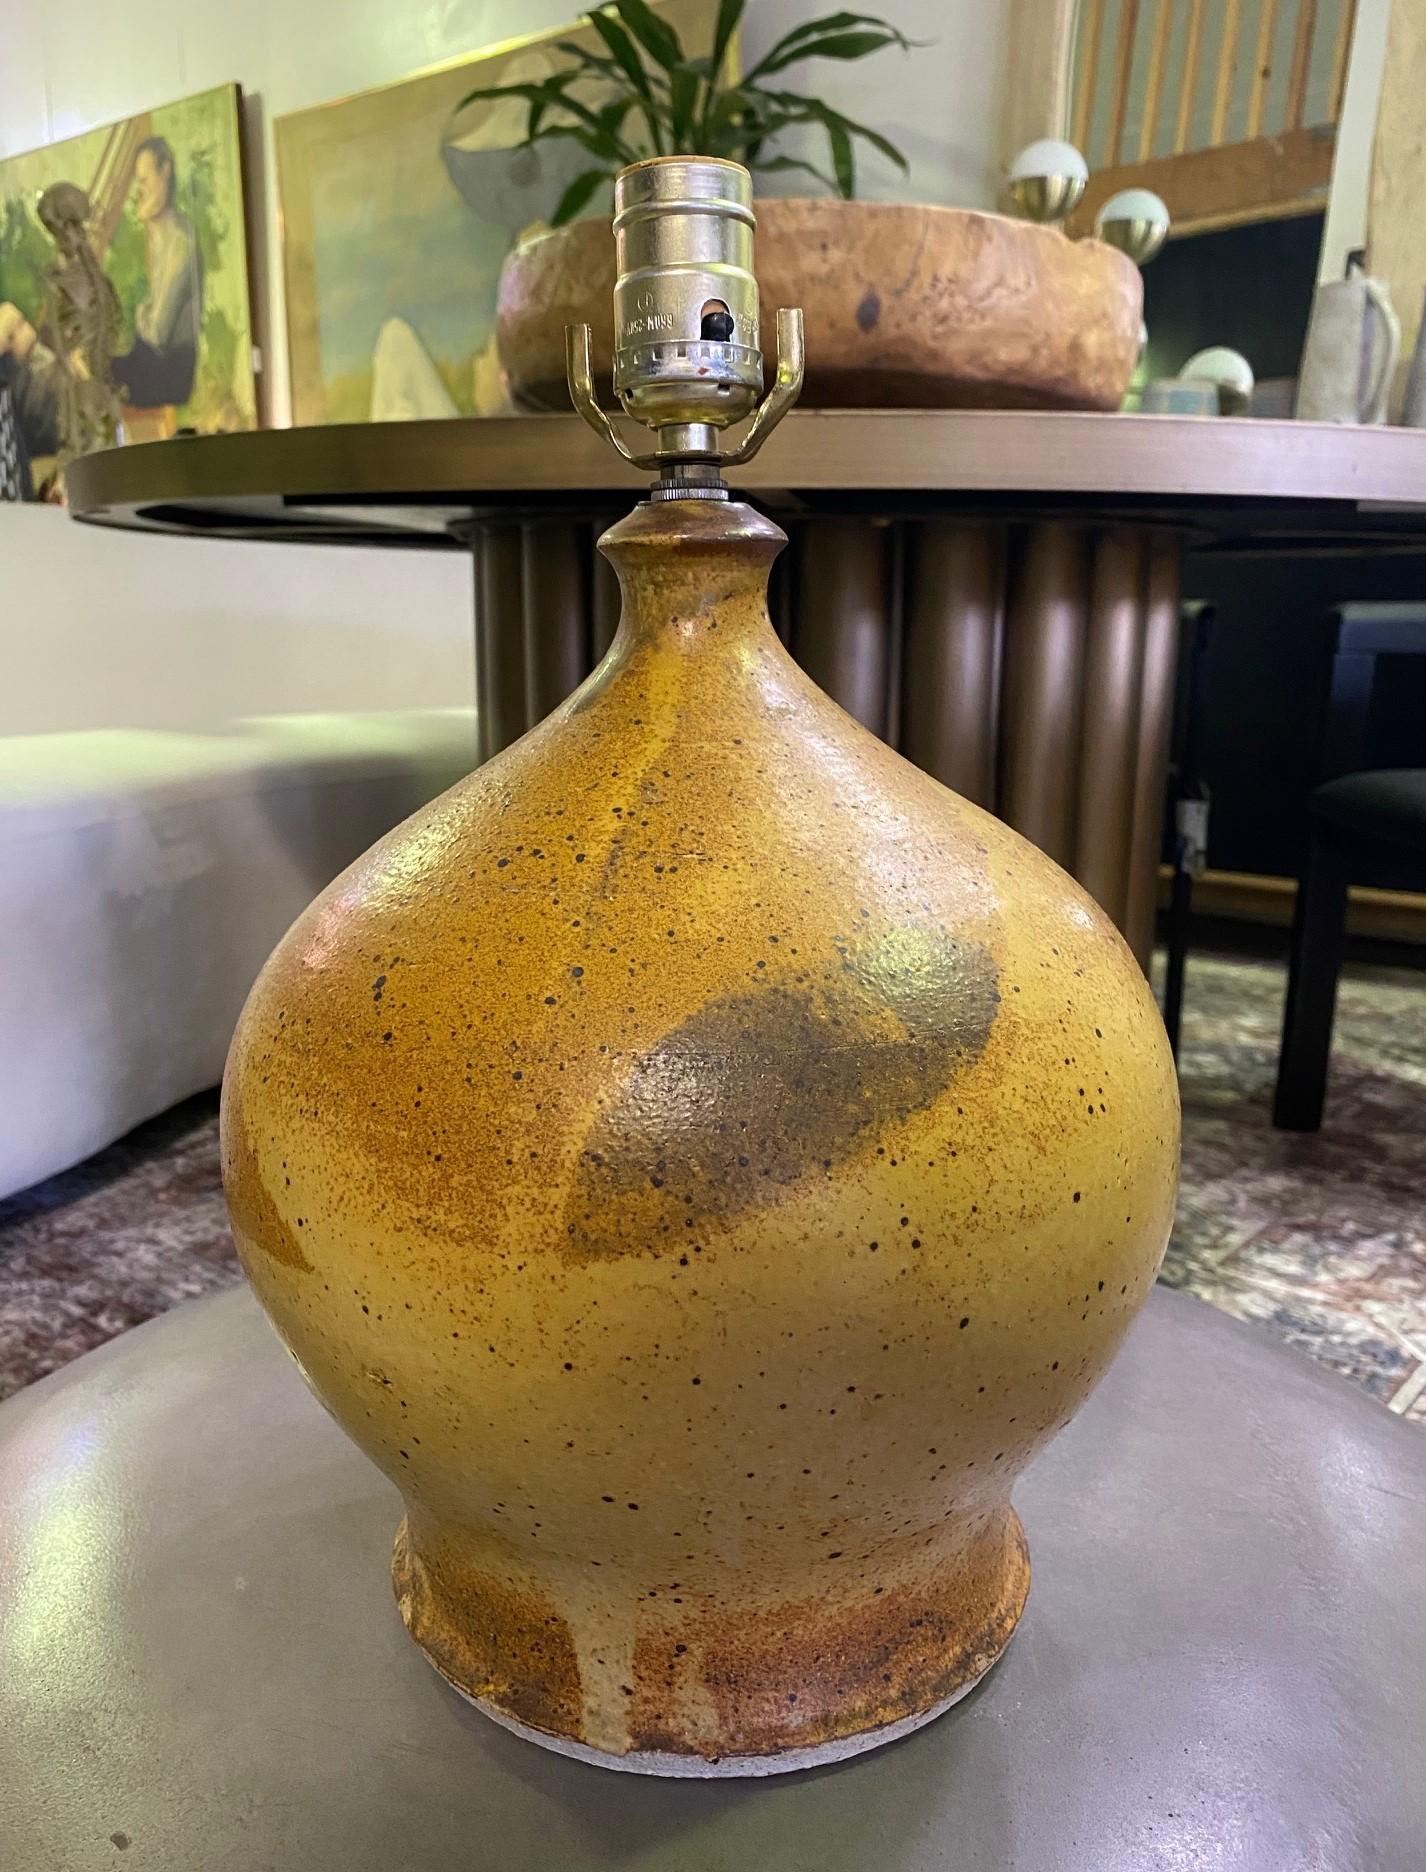 A wonderful speckle glazed lamp by famed American California Archectual potter David Cressey. This is an early work done while David was at UCLA working with Laura Andreson. 

Cressey was born and raised in Los Angeles, California. He attended the